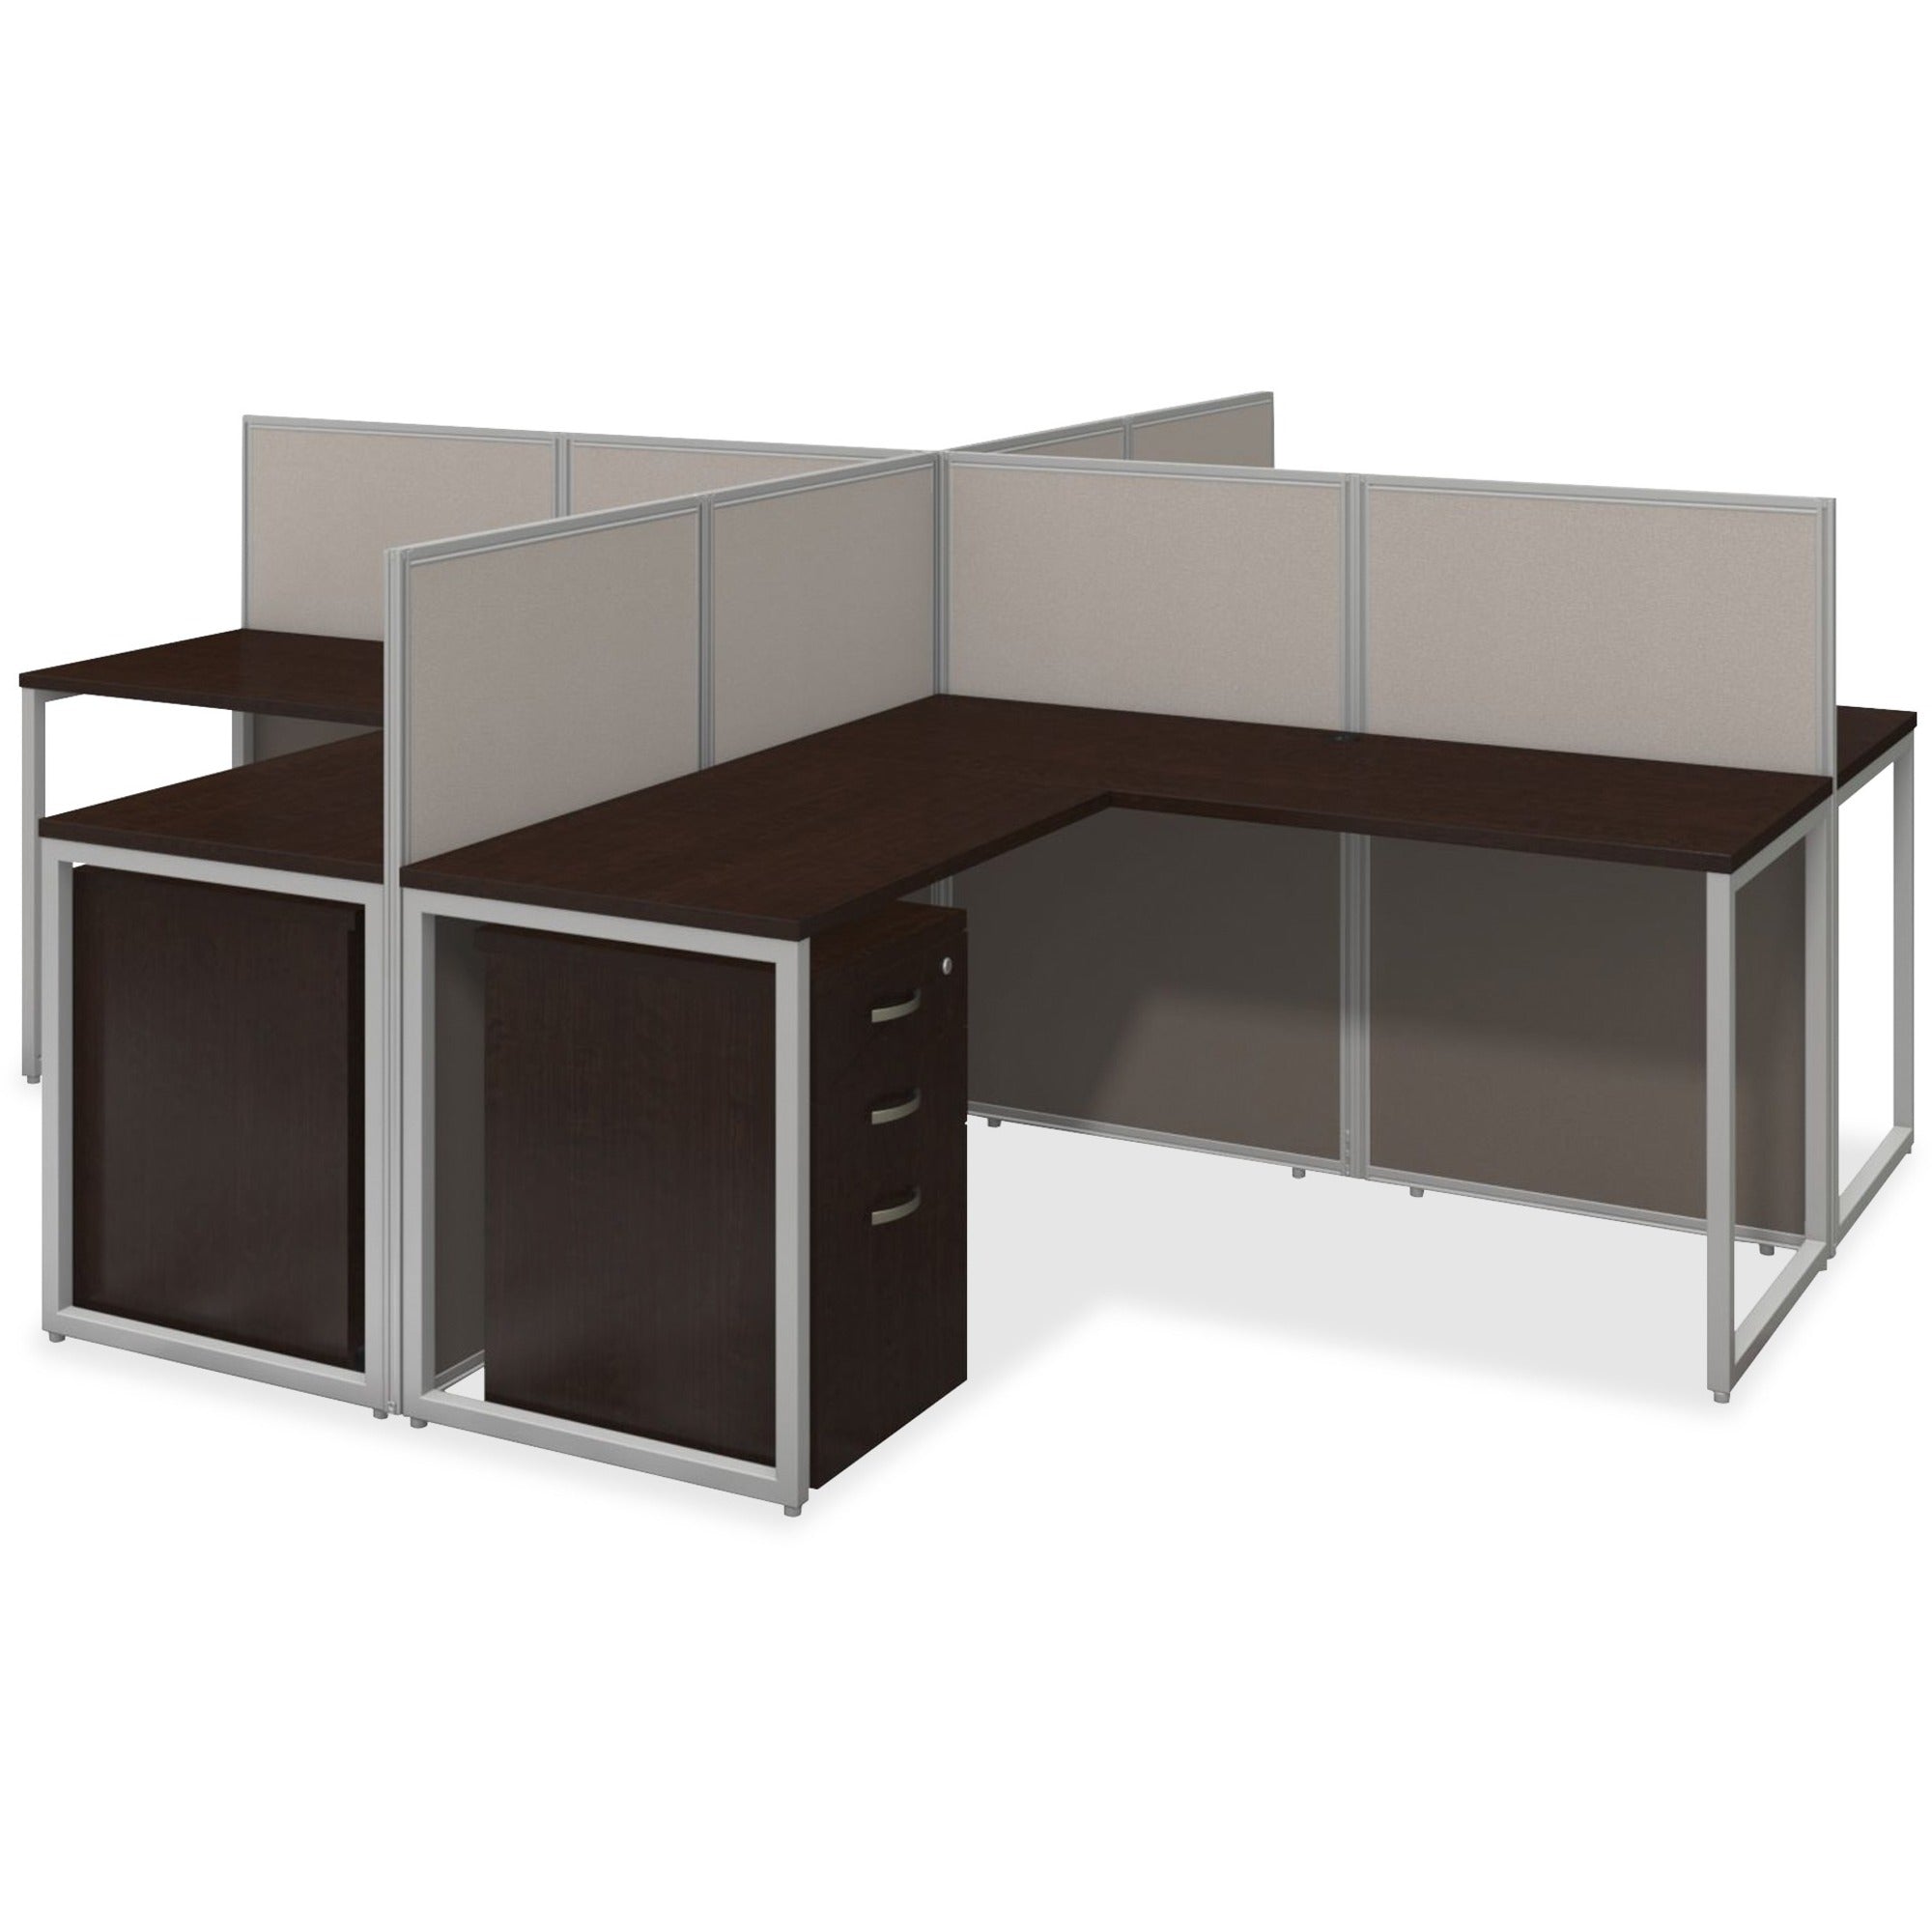 Bush Business Furniture Easy Office 60W 4 Person L Desk Open Office w/3-Drawer Pedestlas - For - Table TopMocha Cherry L-shaped Top - 3 Drawers x 119.09" Table Top Width x 119.09" Table Top Depth - 44.88" Height - Assembly Required - Light Gray, Stor - 1